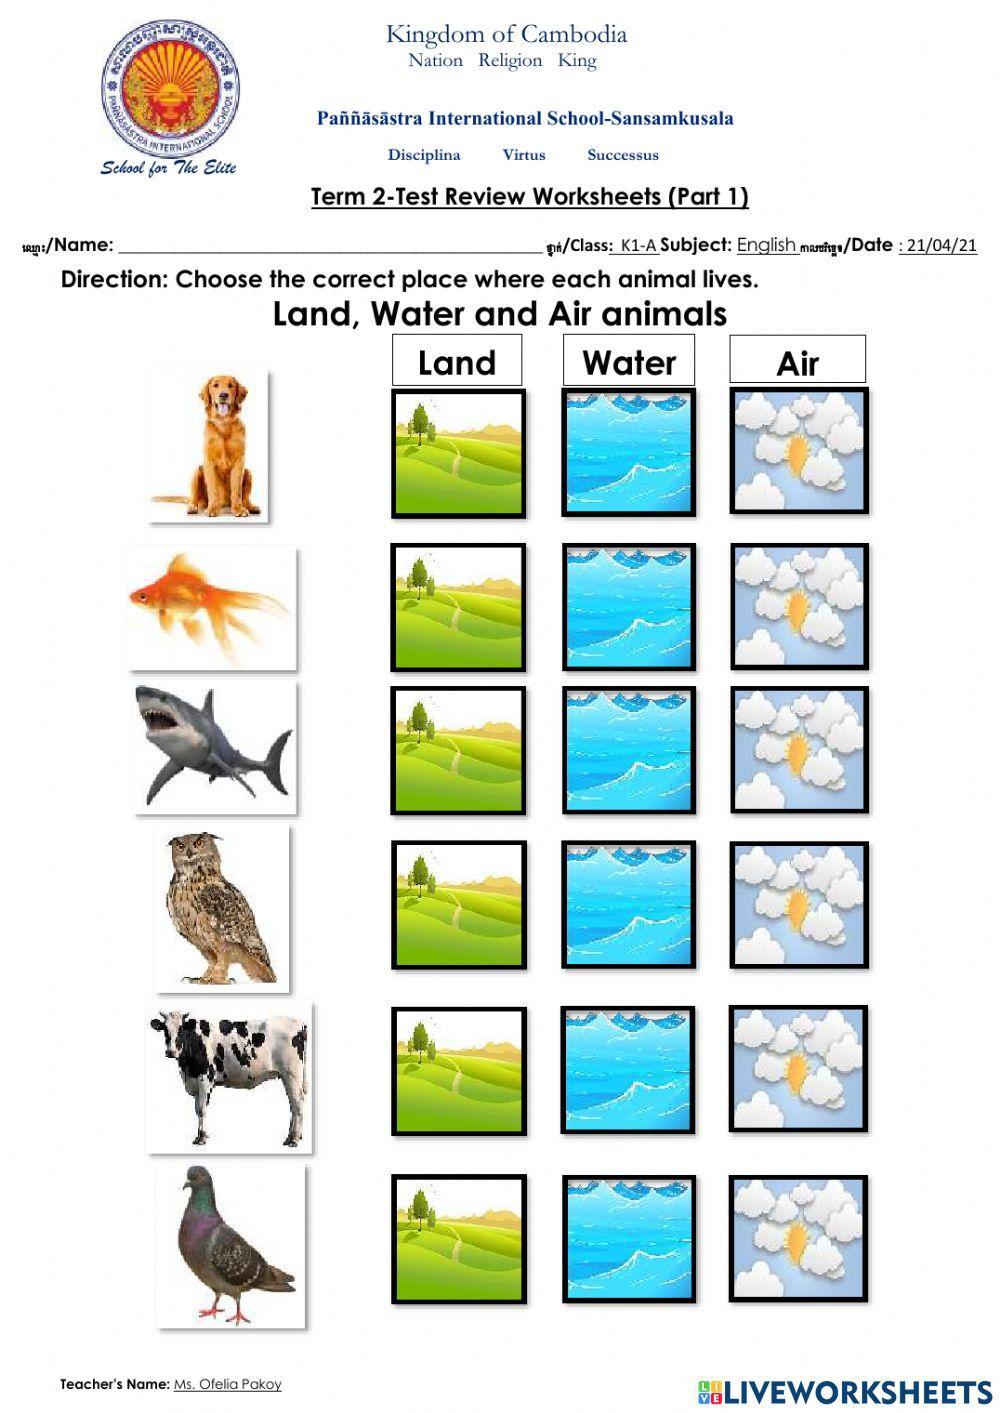 Land, Air and water animals